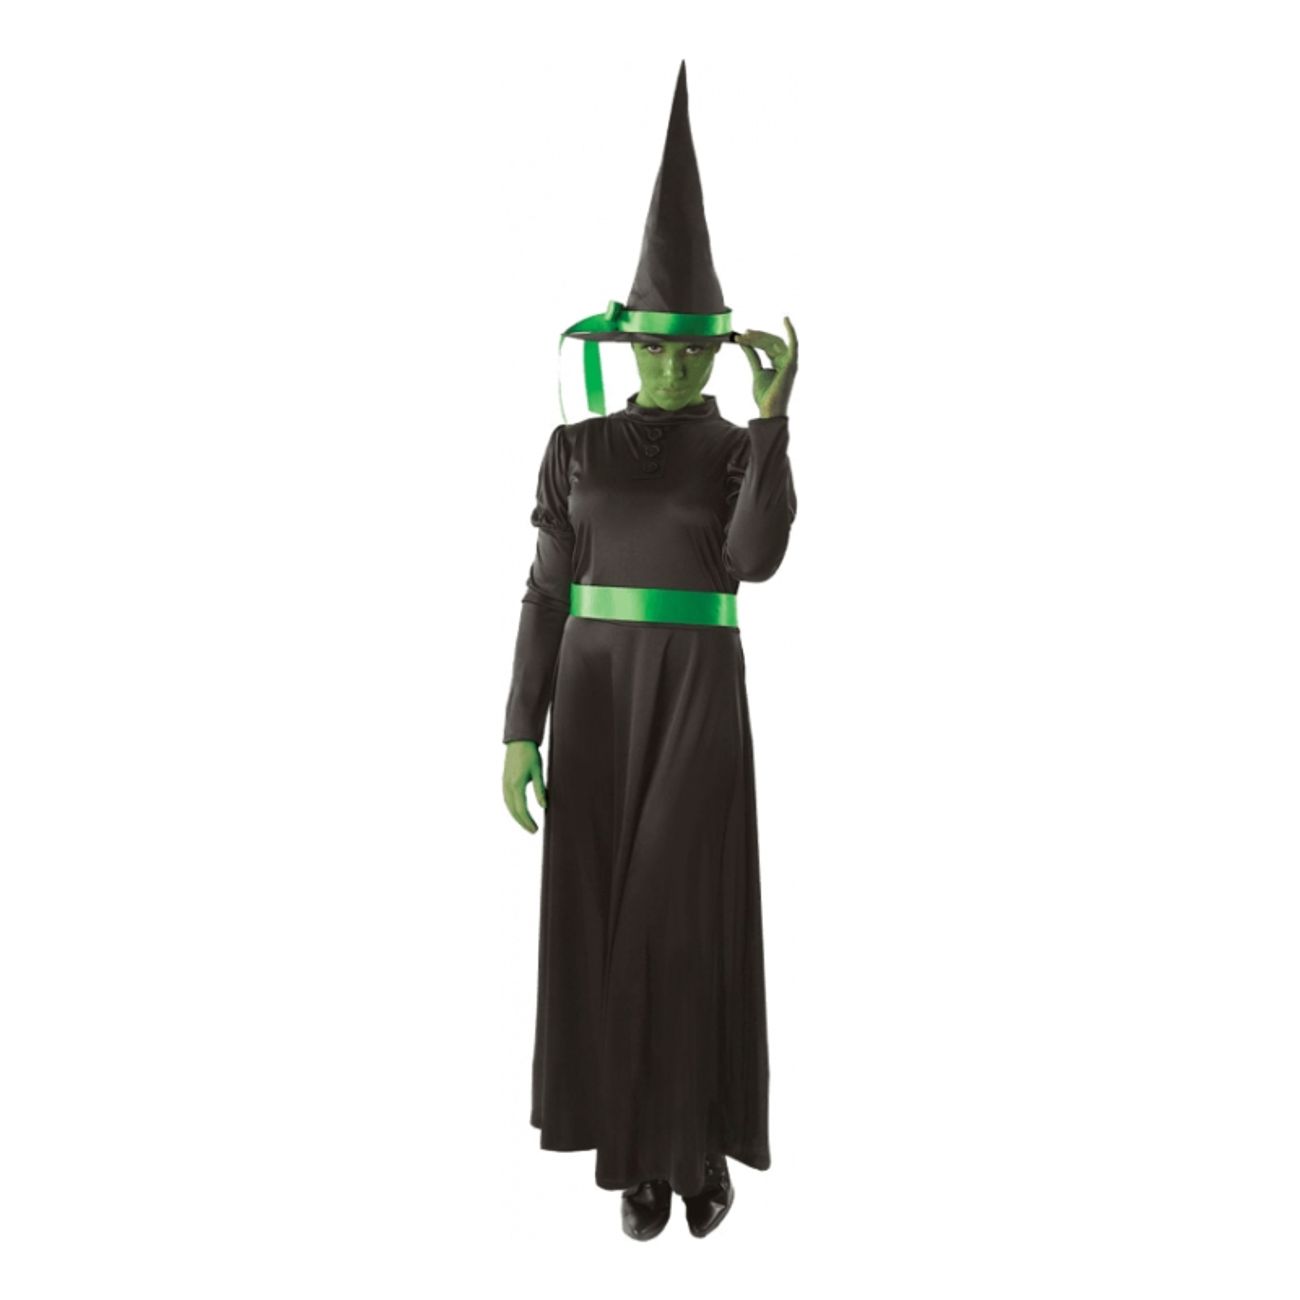 wicked-witch-outfit-medium-1